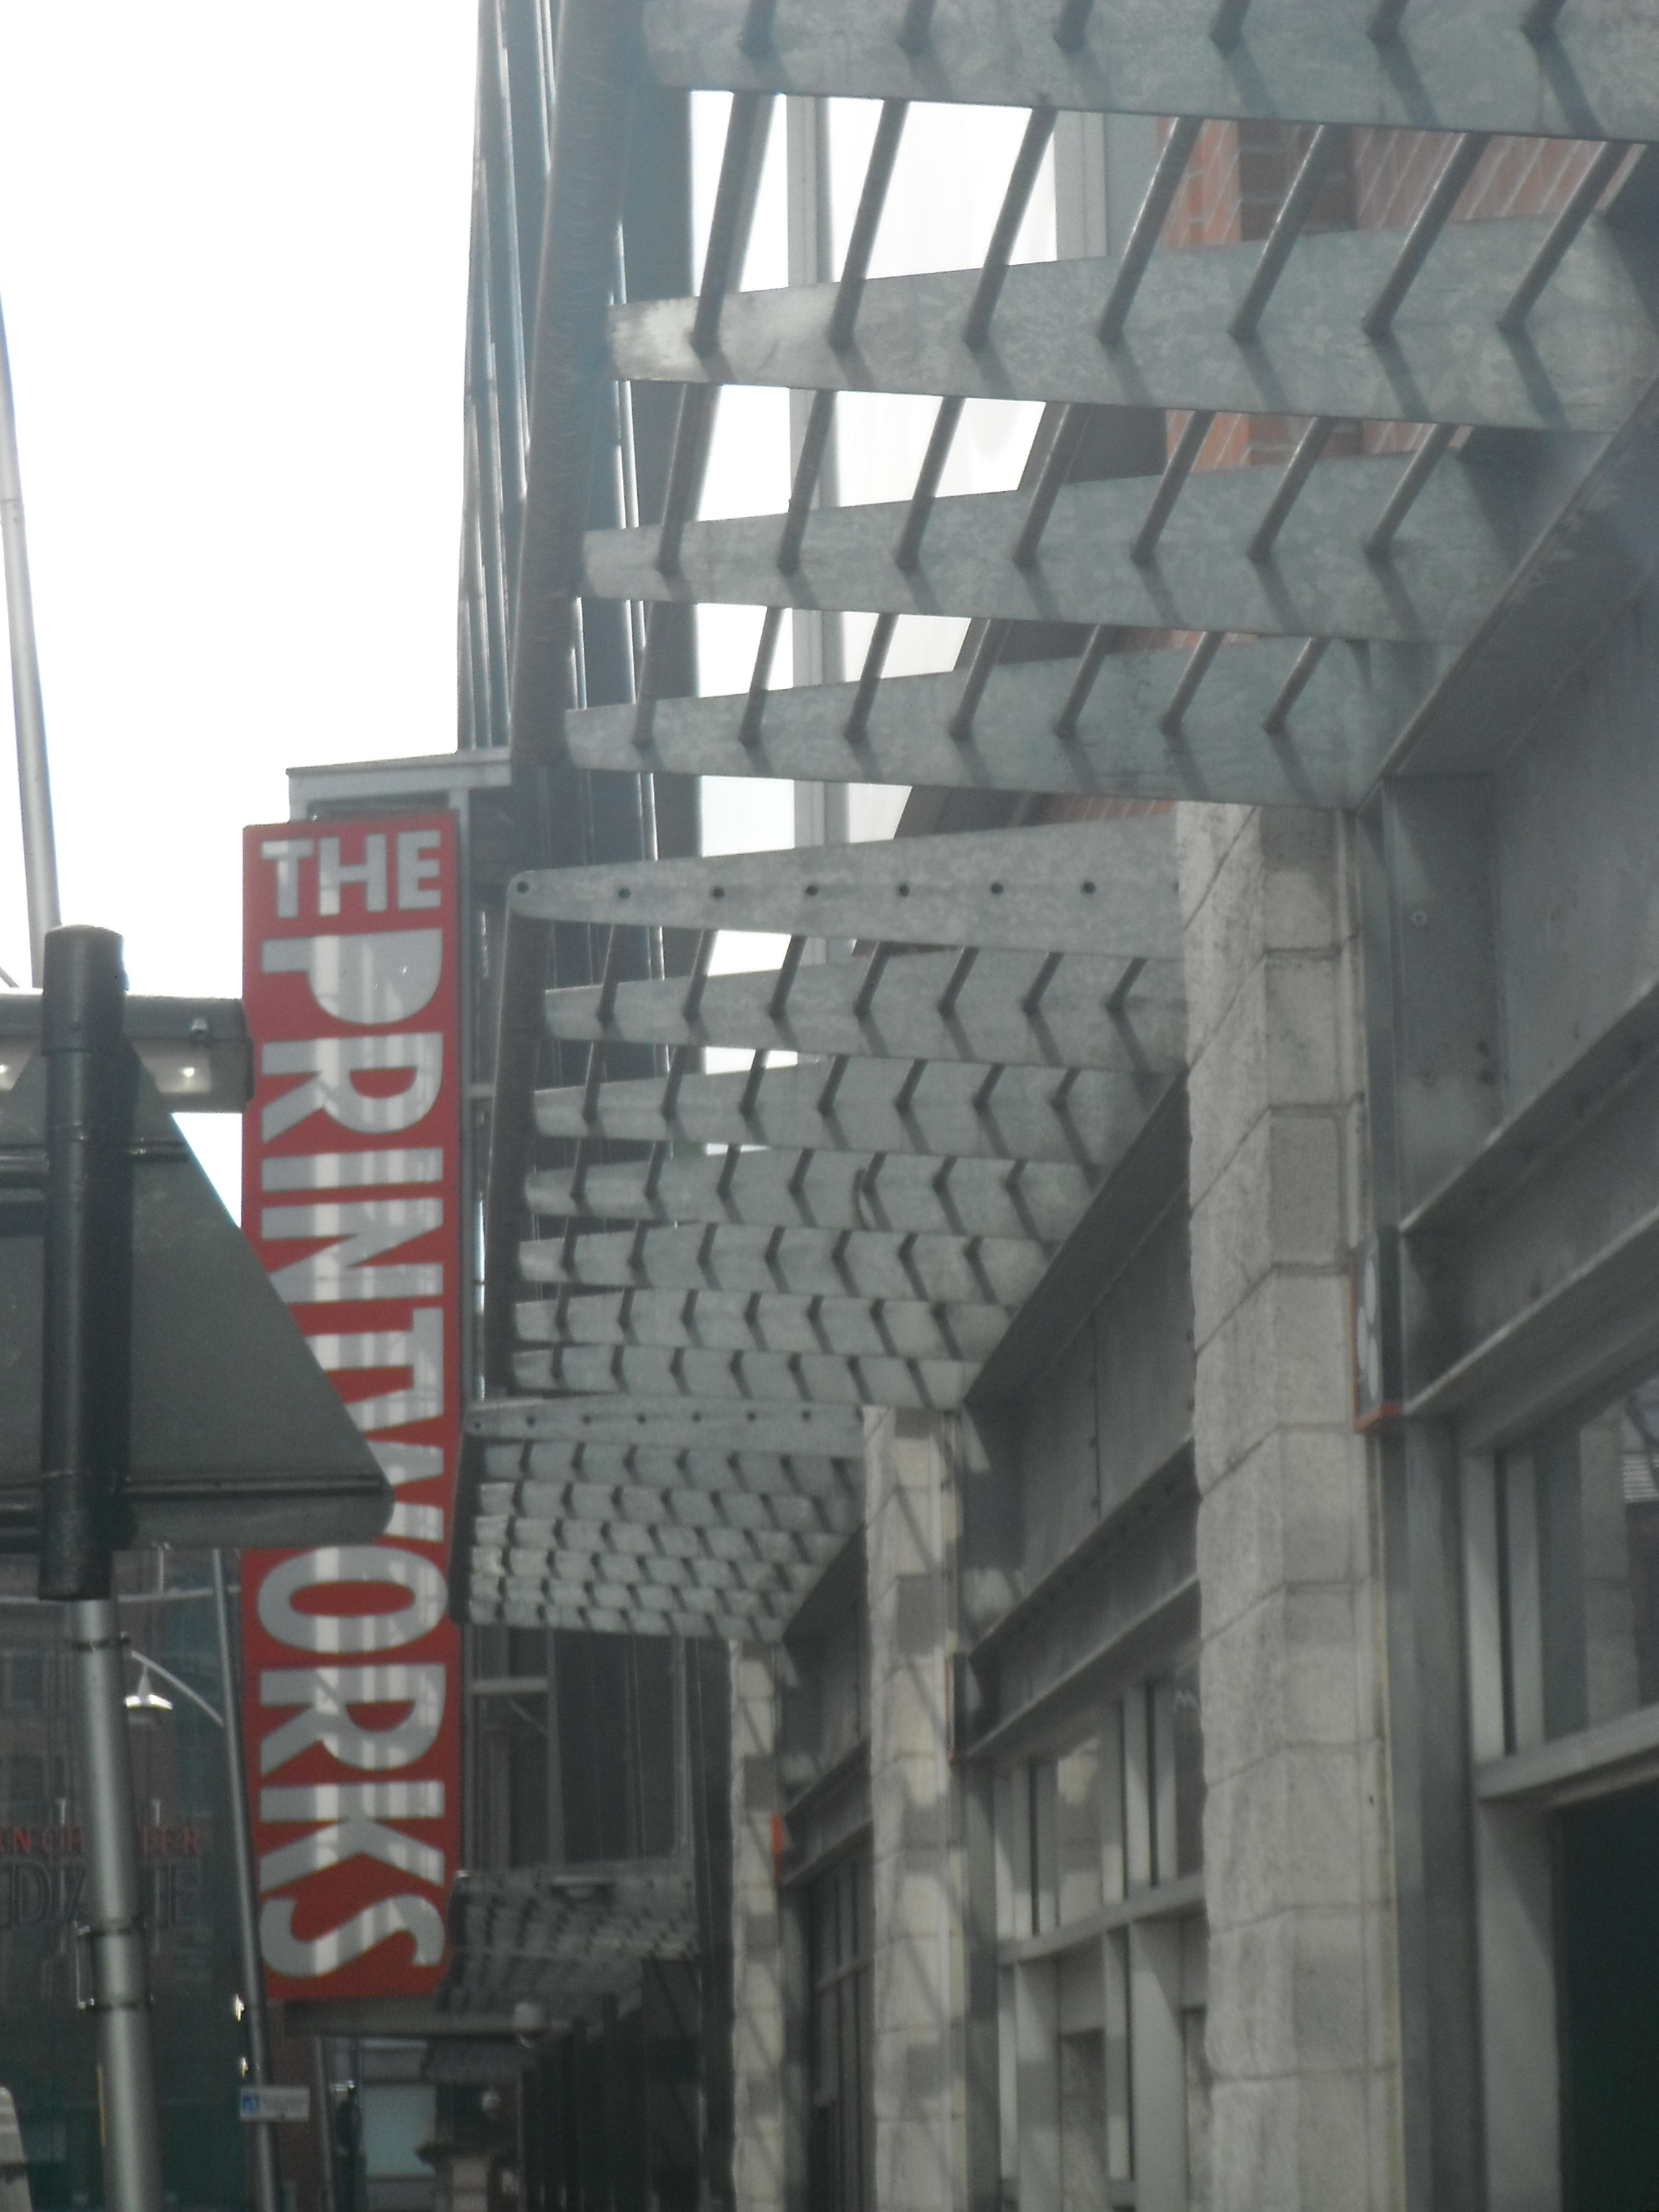 Photo, taken by me - the Manchester Printworks, from outside